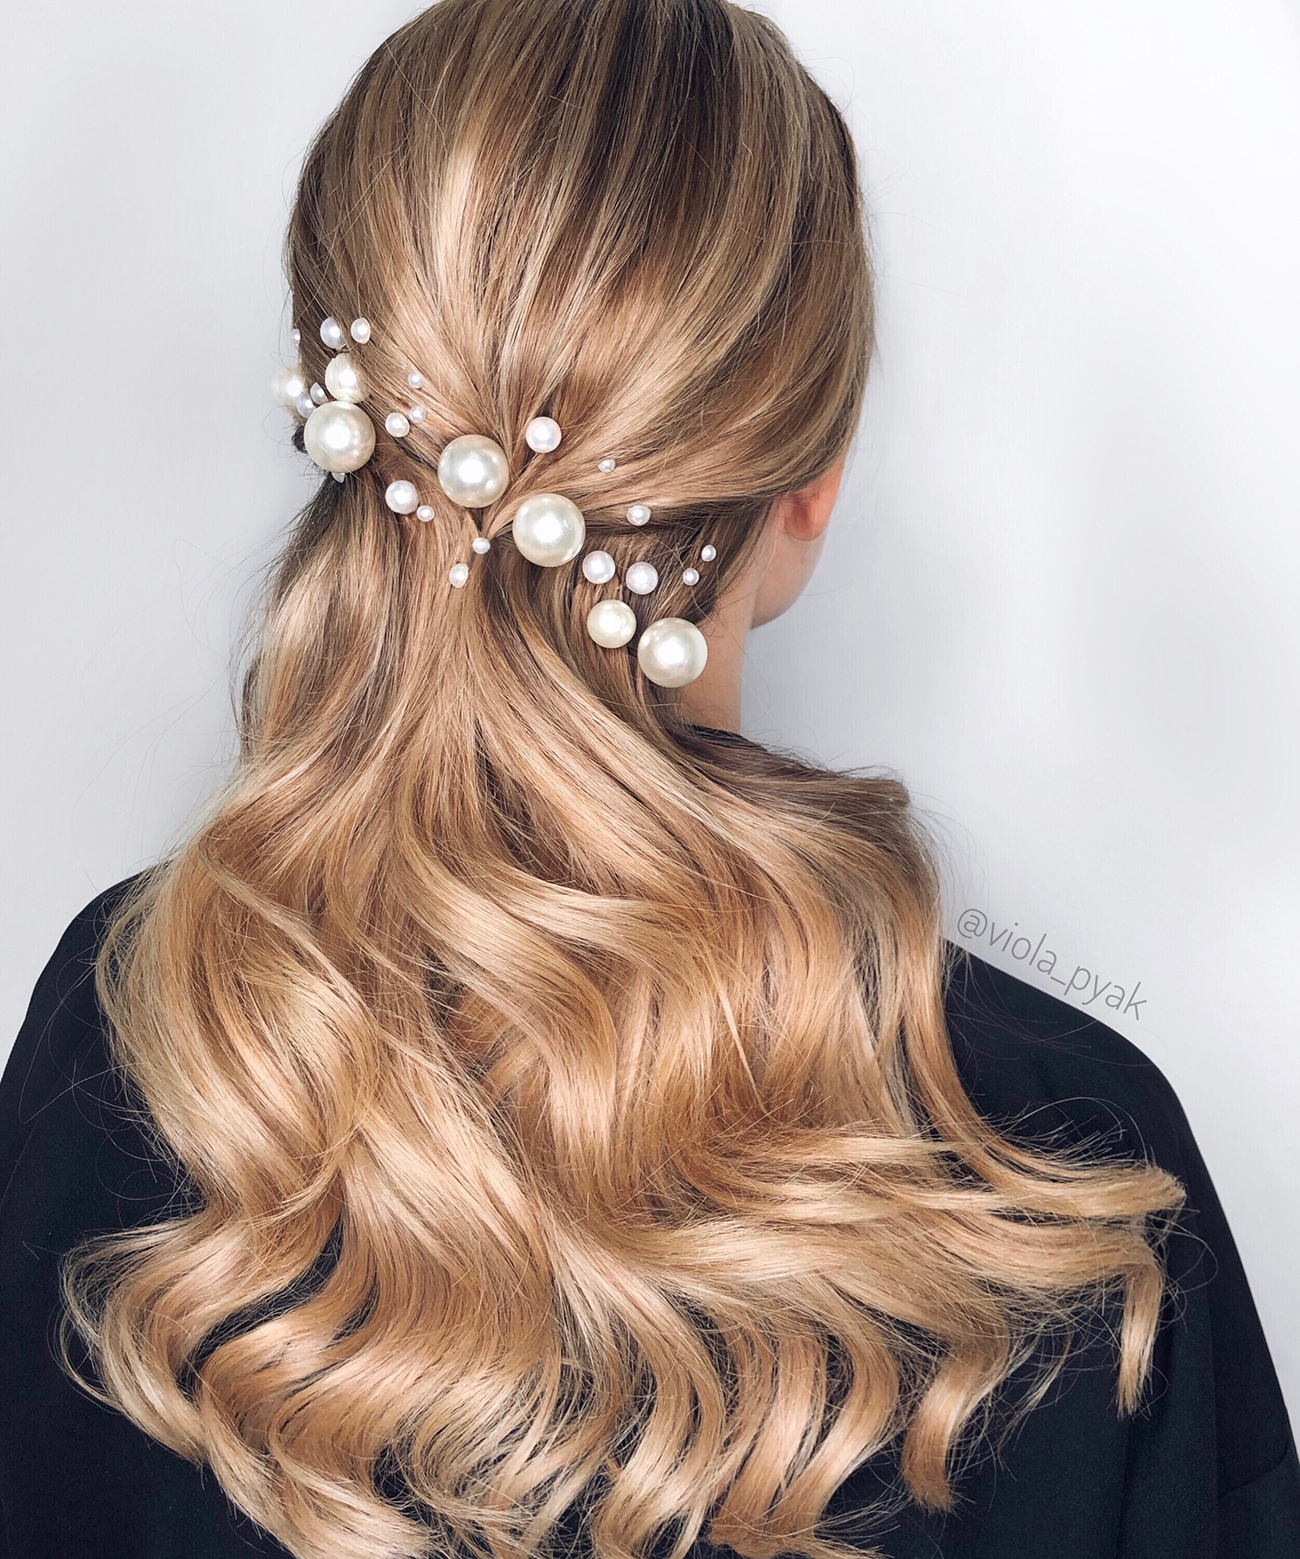 Swept back wavy hair with assorted pearl pins looks very chic, refined and makes a stylish statement